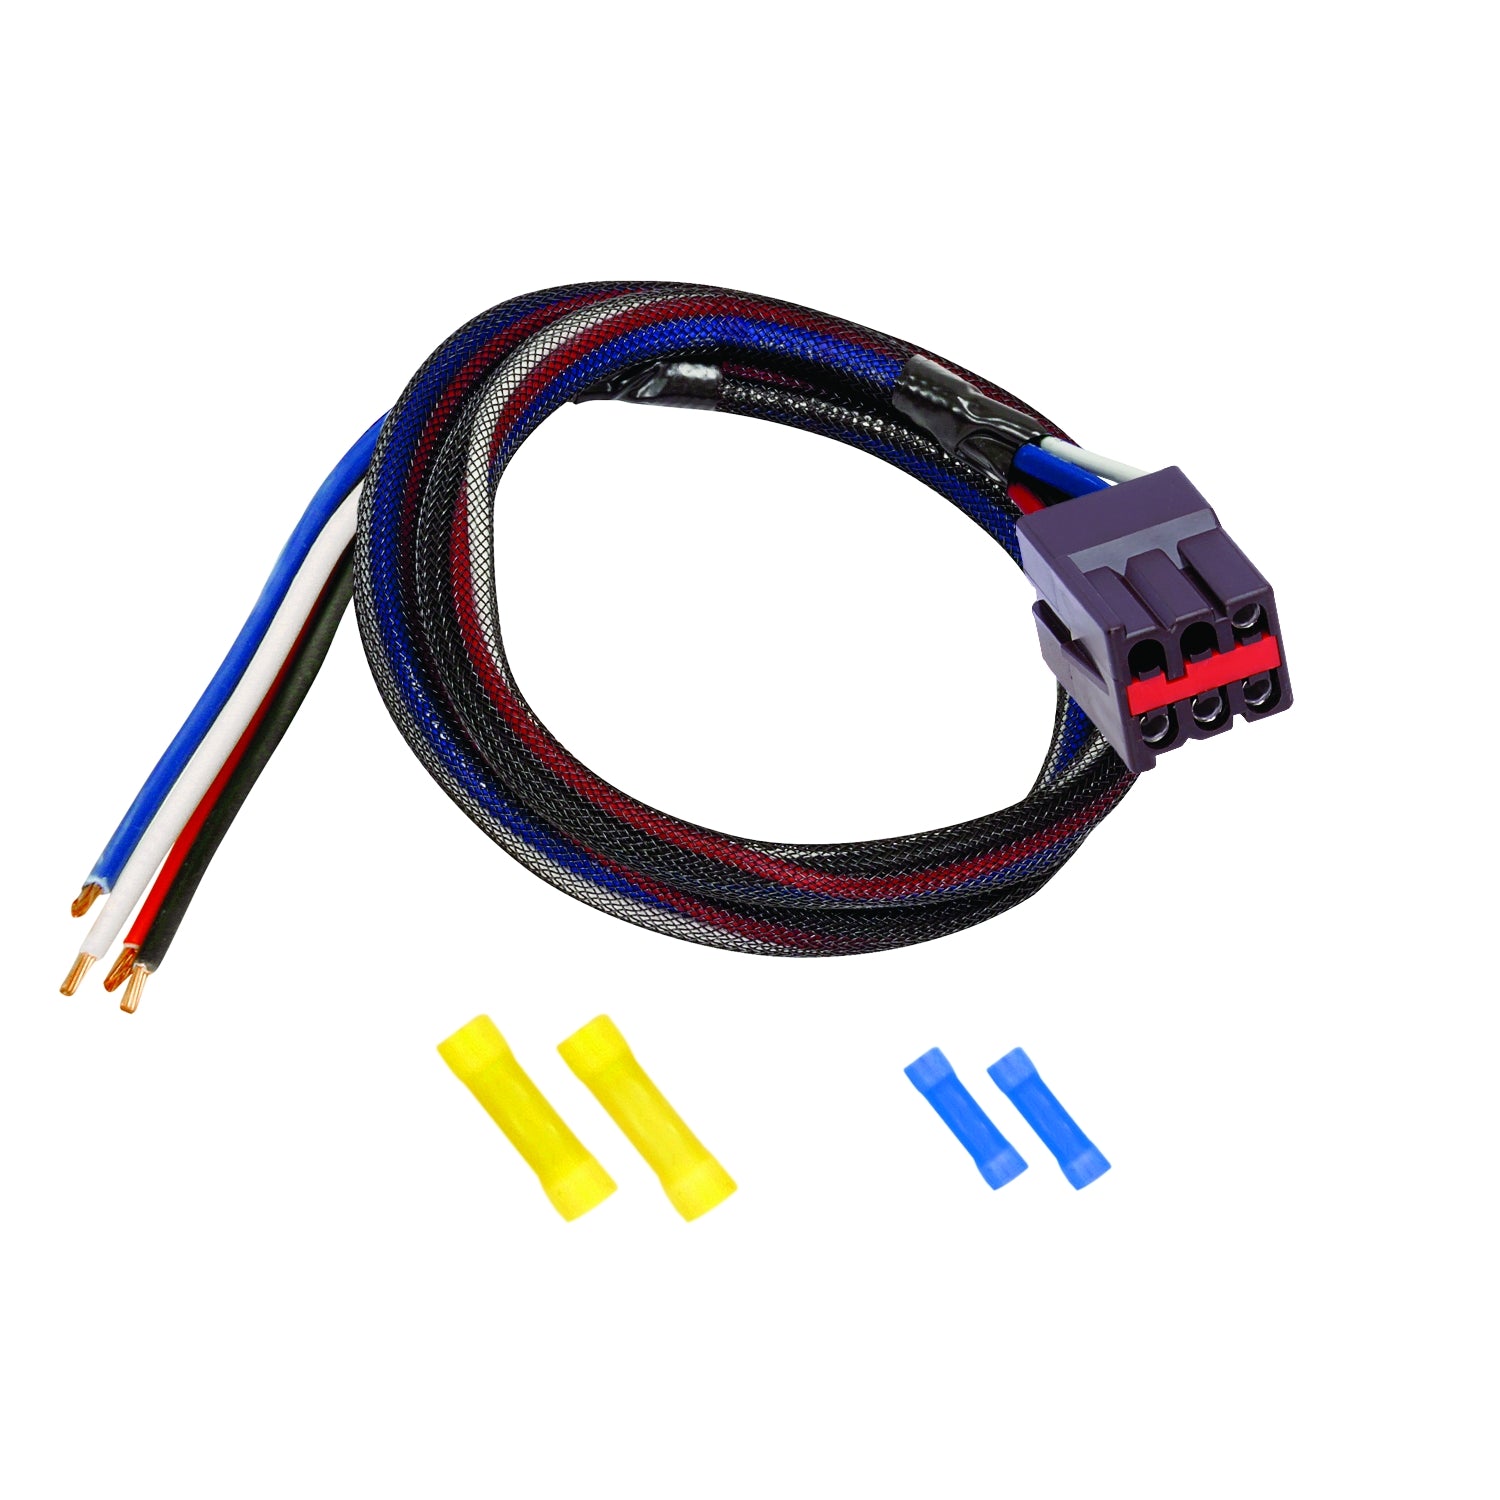 Brake Control Wiring Adap For Ford Bronco, Ford E-150 Econoline Club Wagon, Ford E-350 Econoline Club Wagon, Ford E-450 Econoline Super Duty, Ford F-250 Super Duty, Mercury Mountaineer